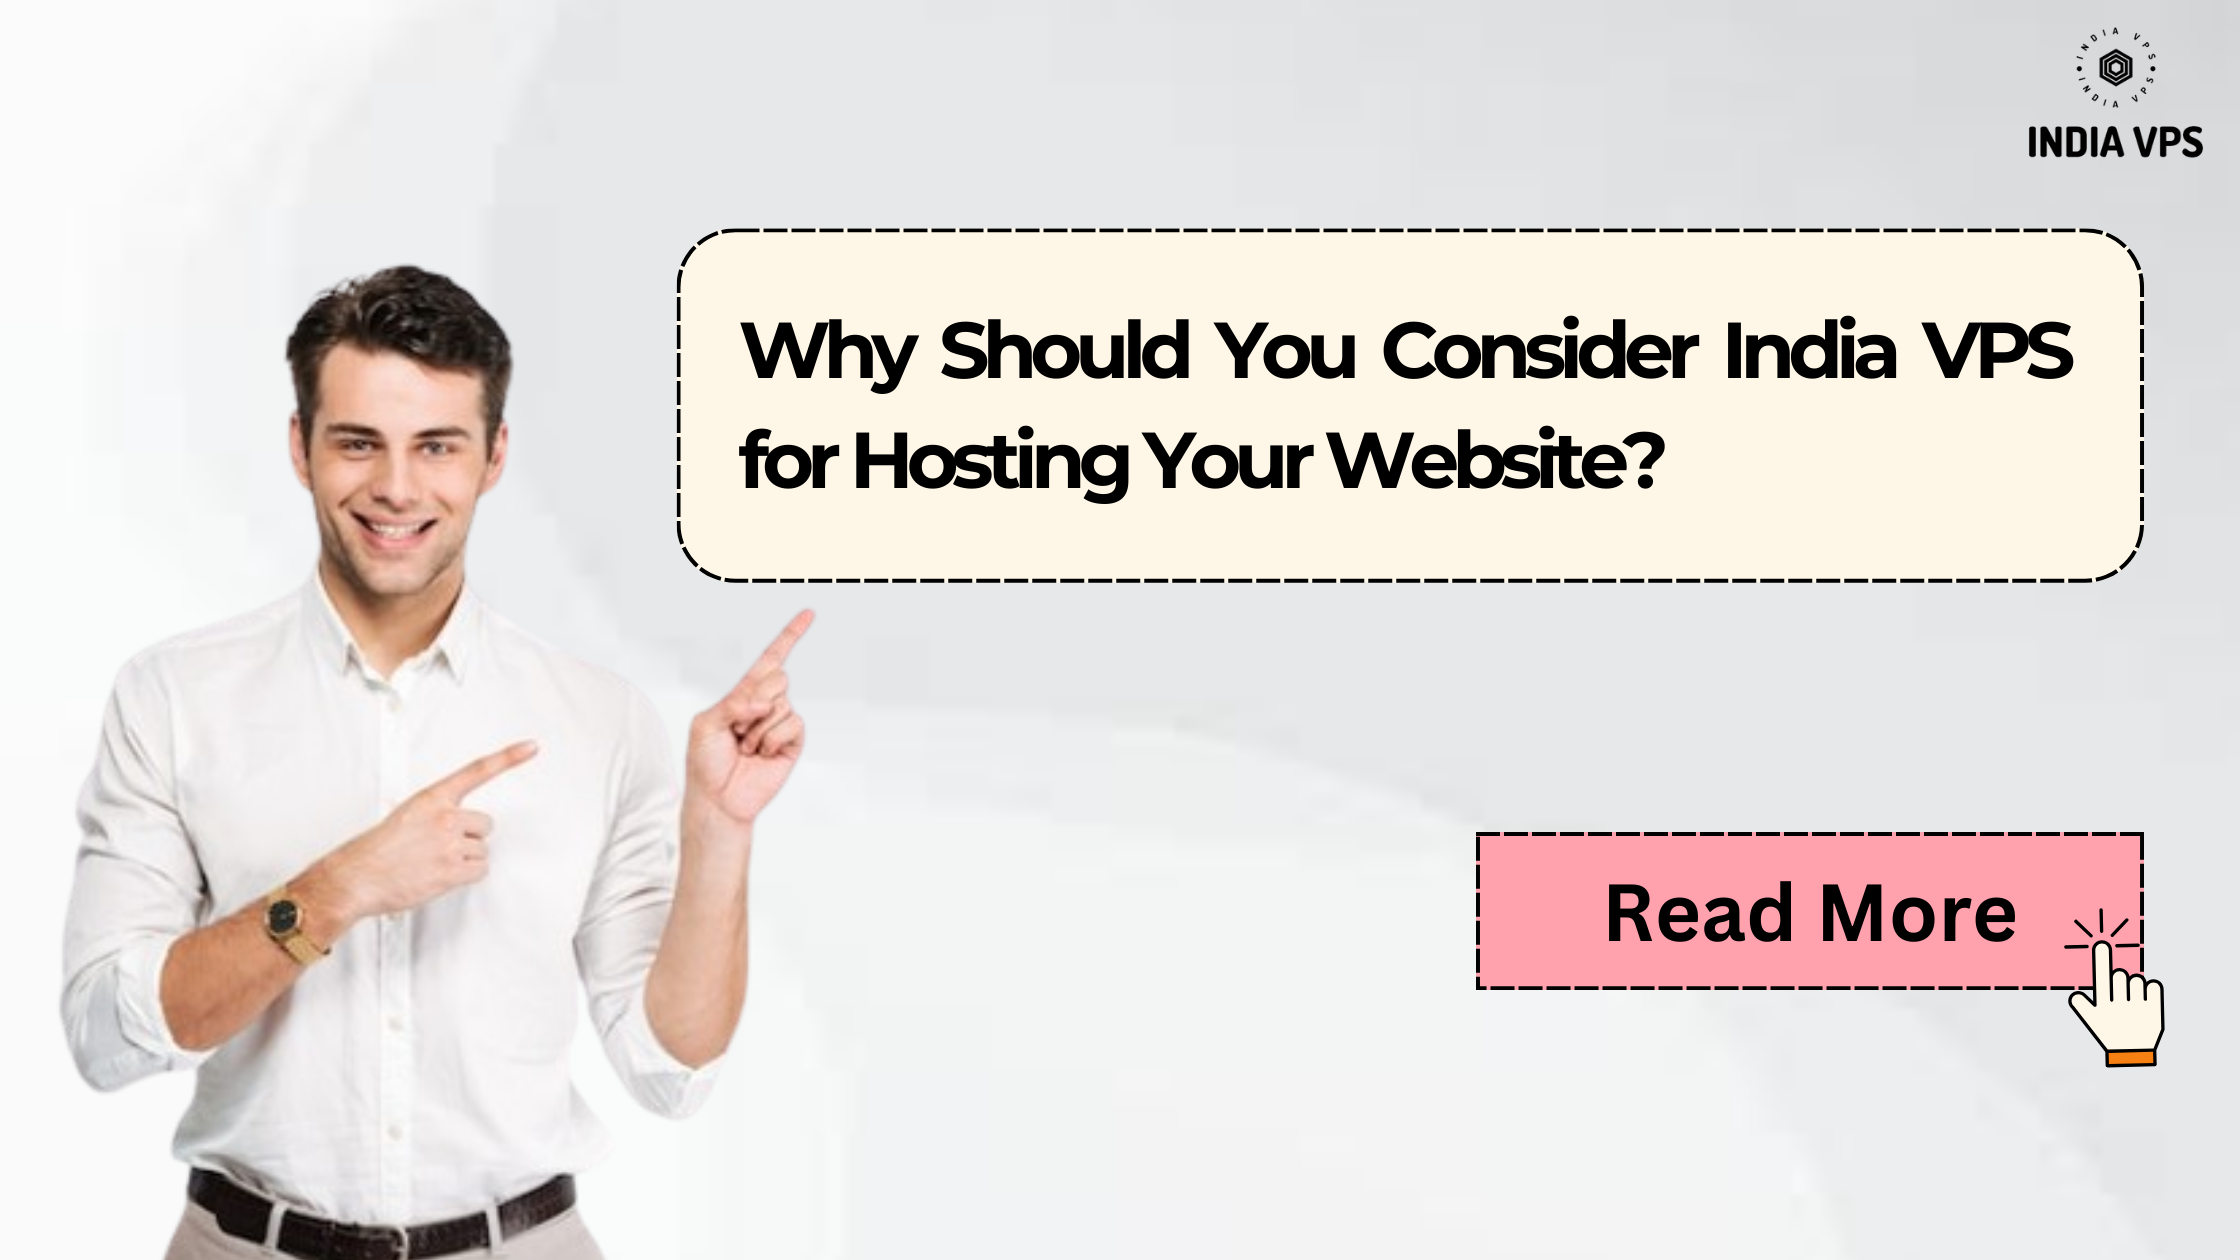 Why Should You Consider India VPS for Hosting Your Website